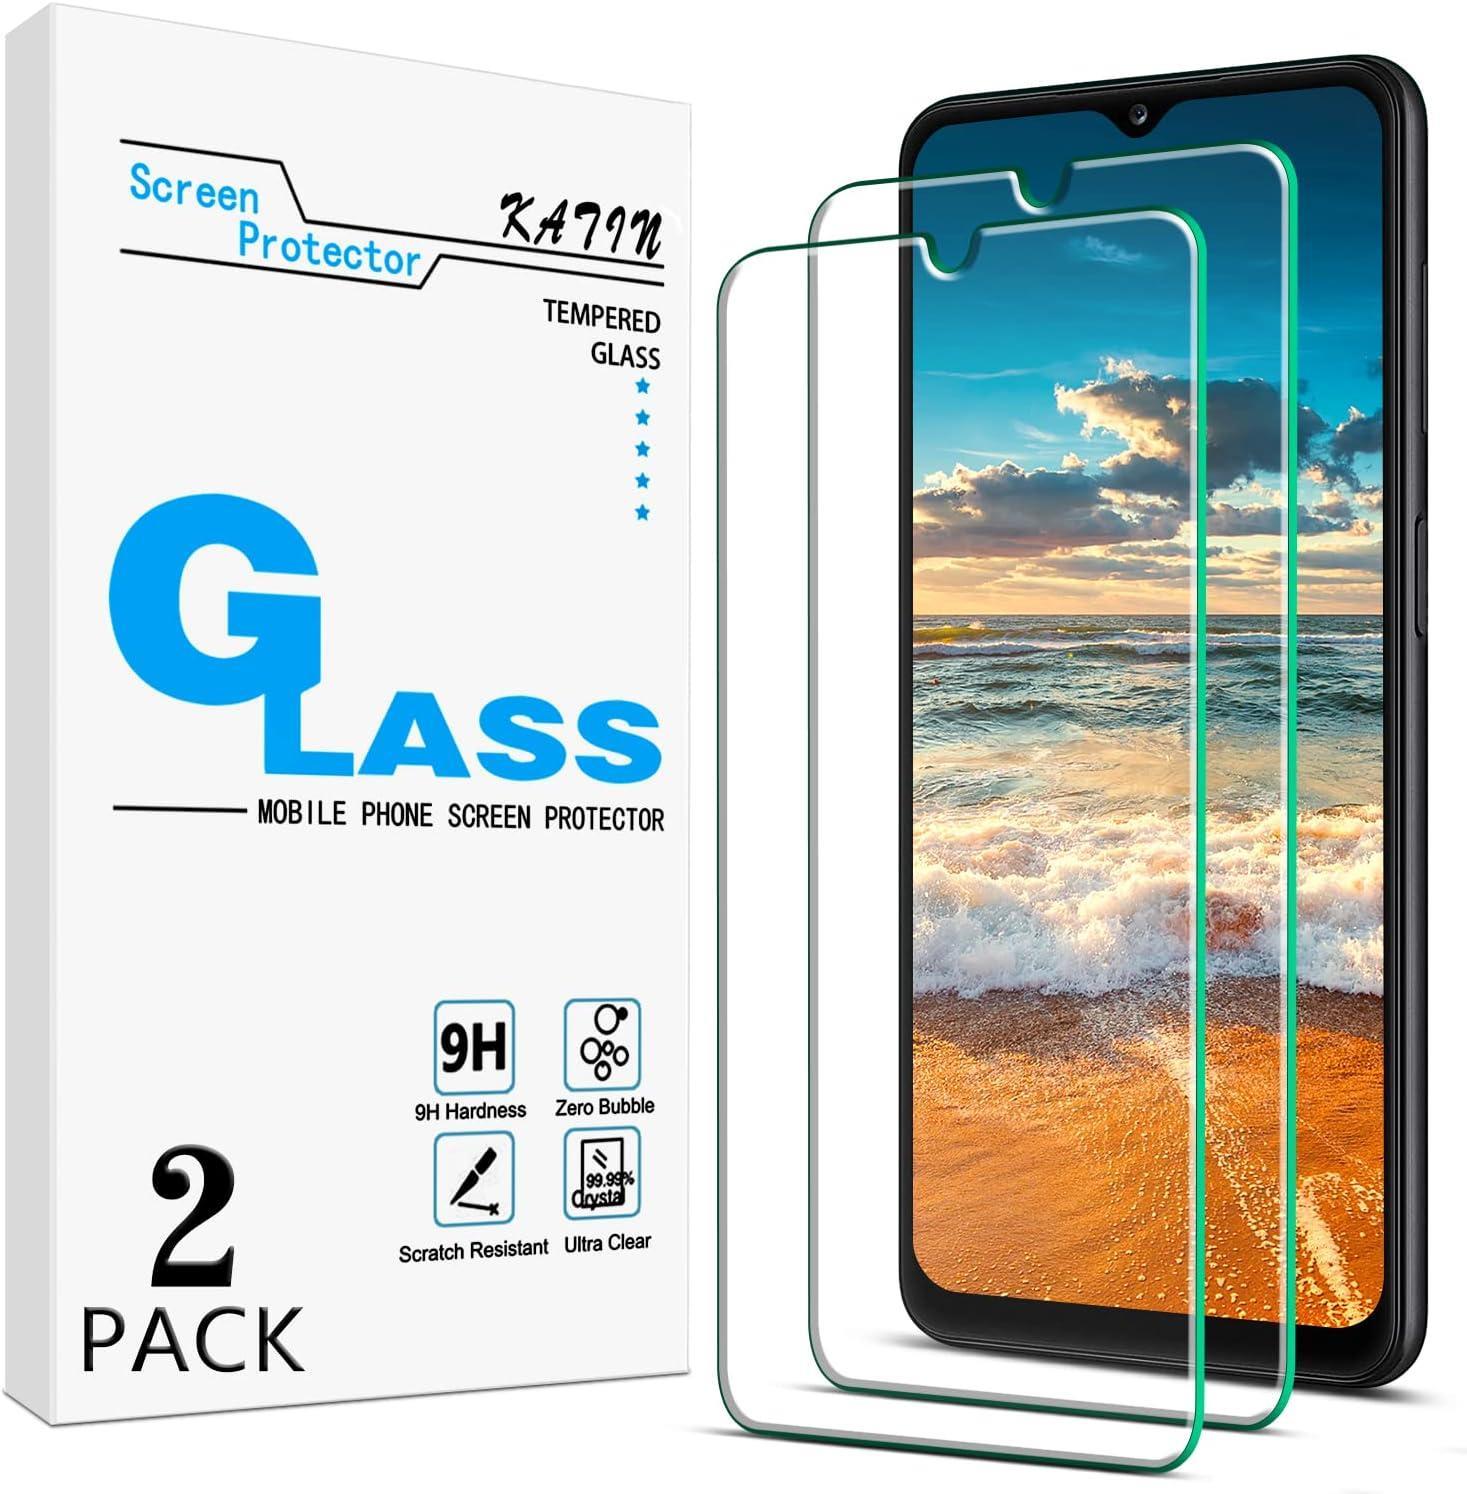 2 PACK 9H Tempered Glass Screen Protector for Nokia G10